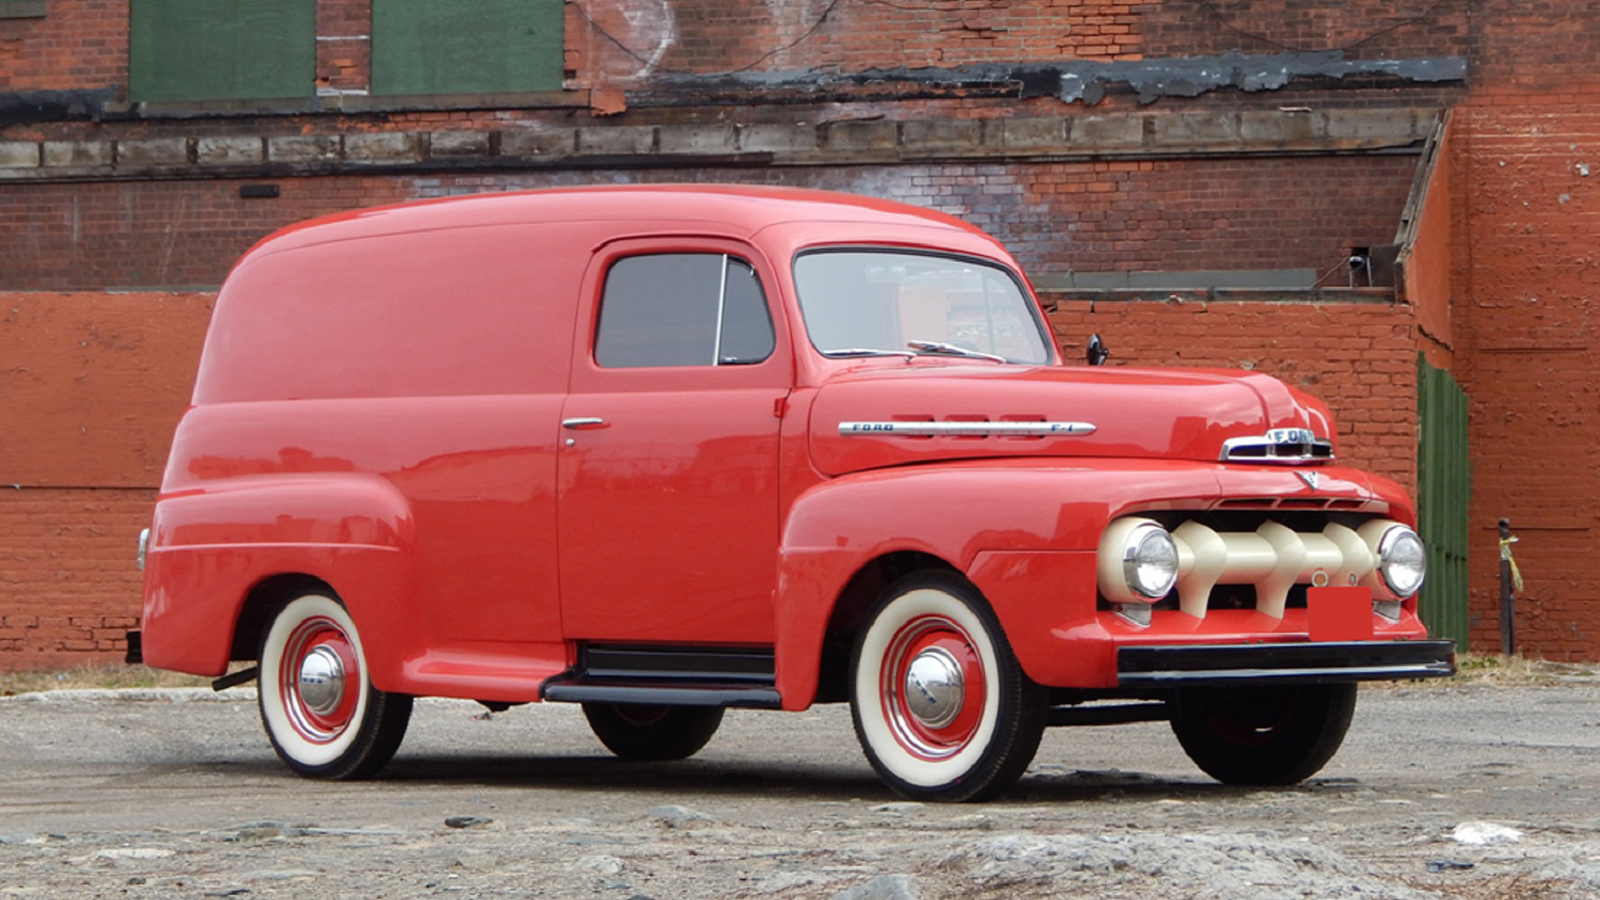 1951 F-1 Panel Van Delivers the Goods in Style (Photos) | Ford-trucks